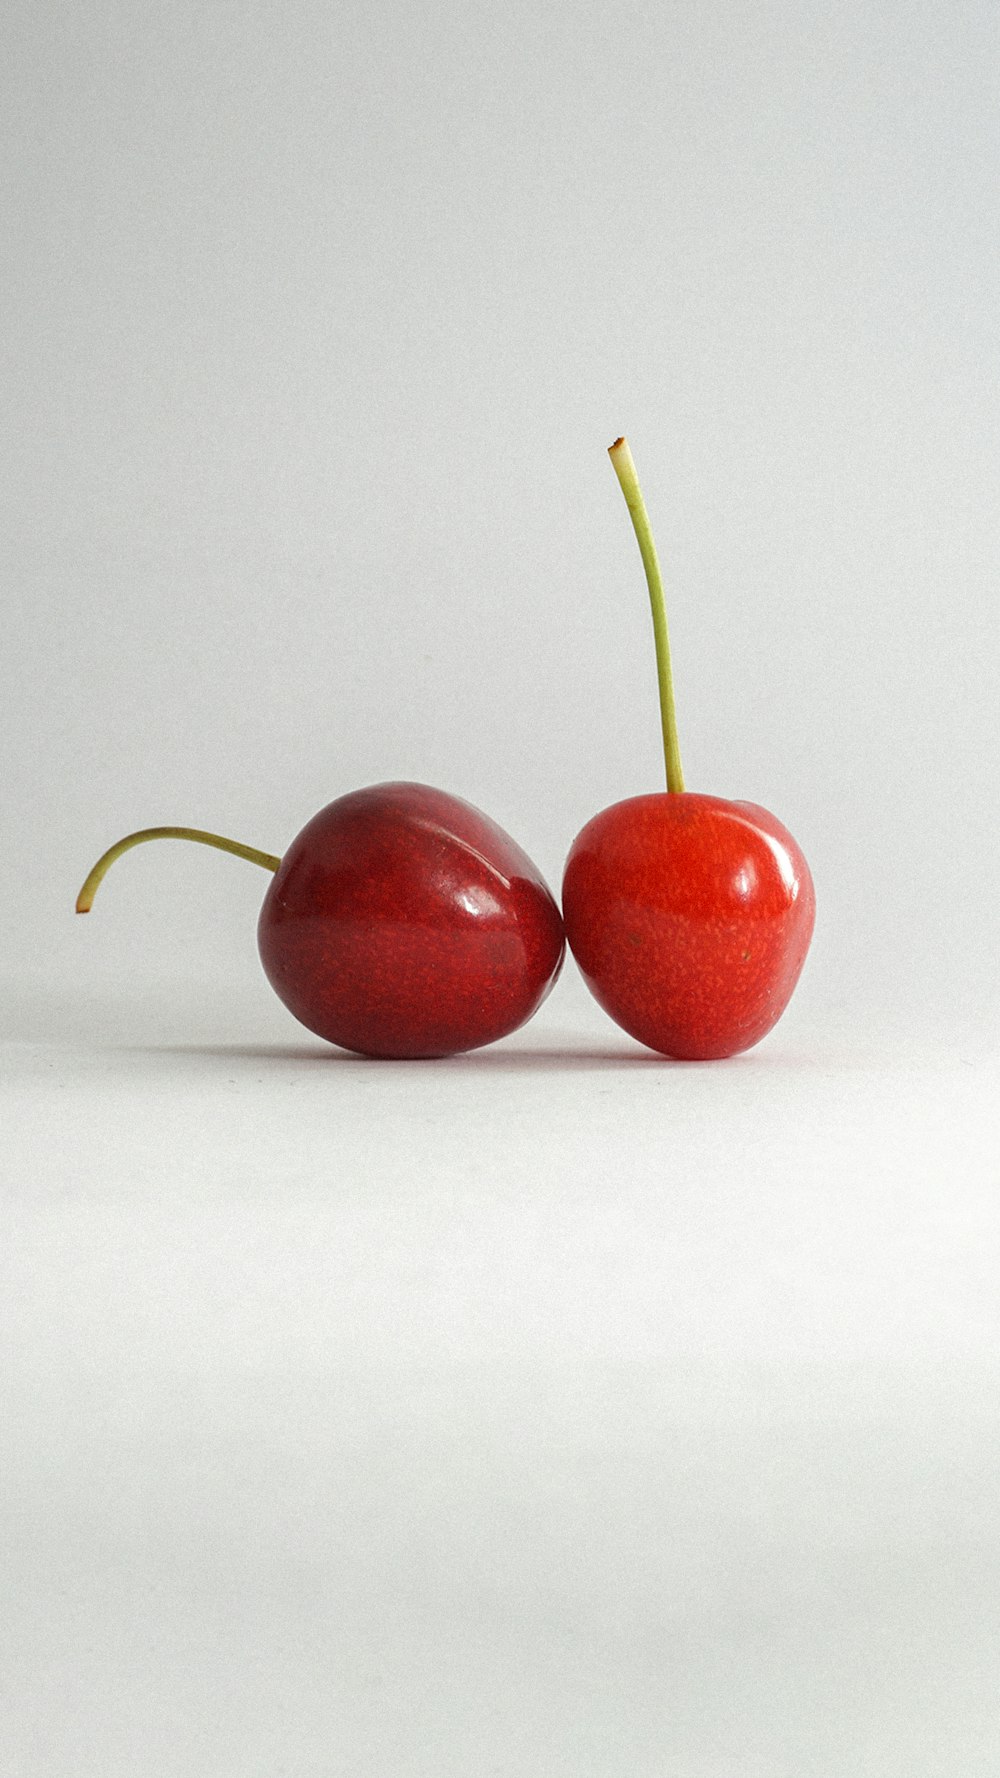 two cherries sitting side by side on a white surface